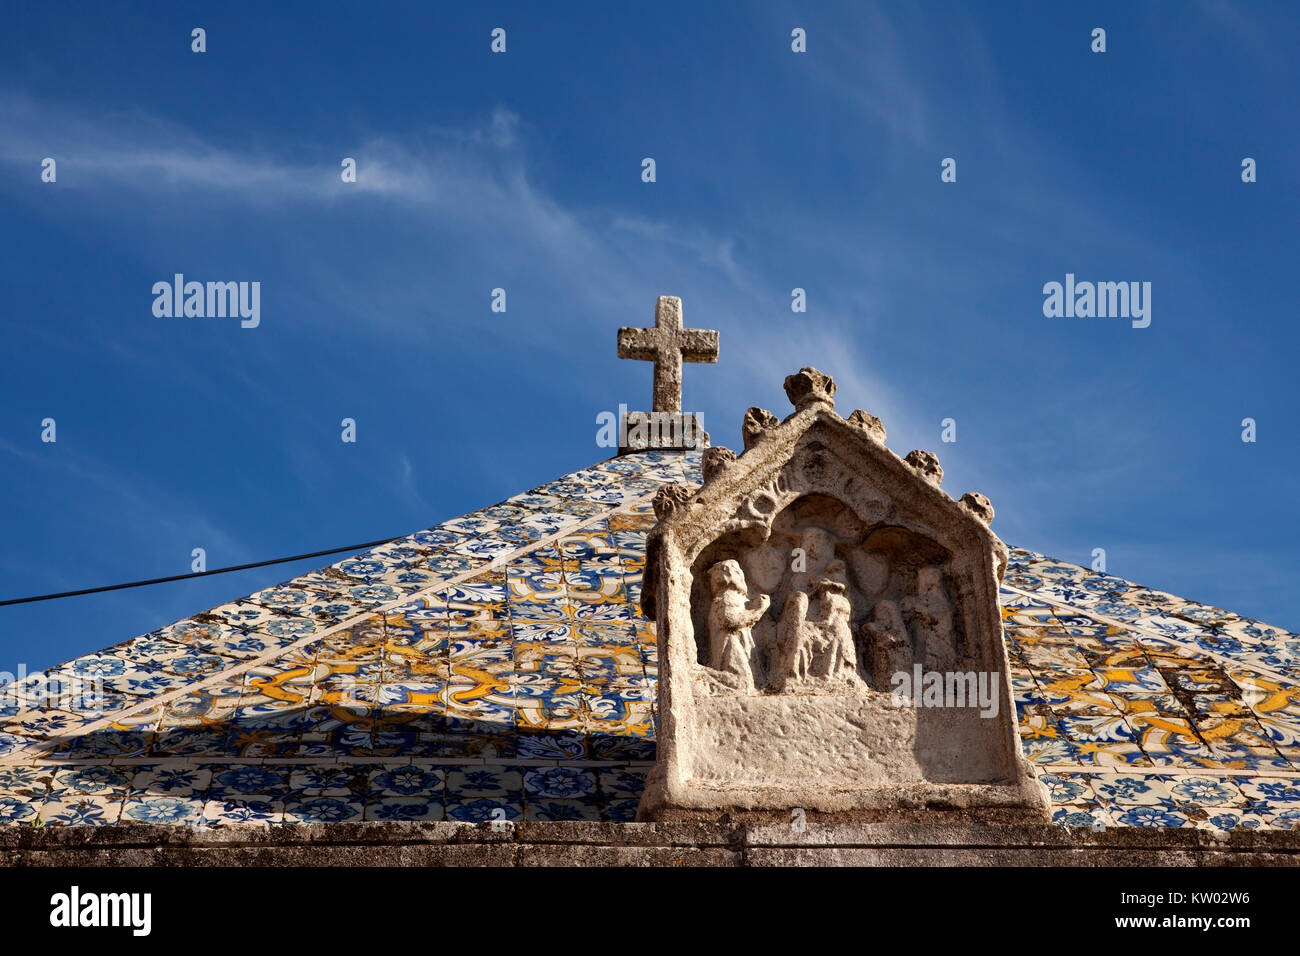 Sculpture on the facade of the Ermida da Memória, a chapel at Nazare in Portugal. The chapel is a Christian place of worship. Stock Photo